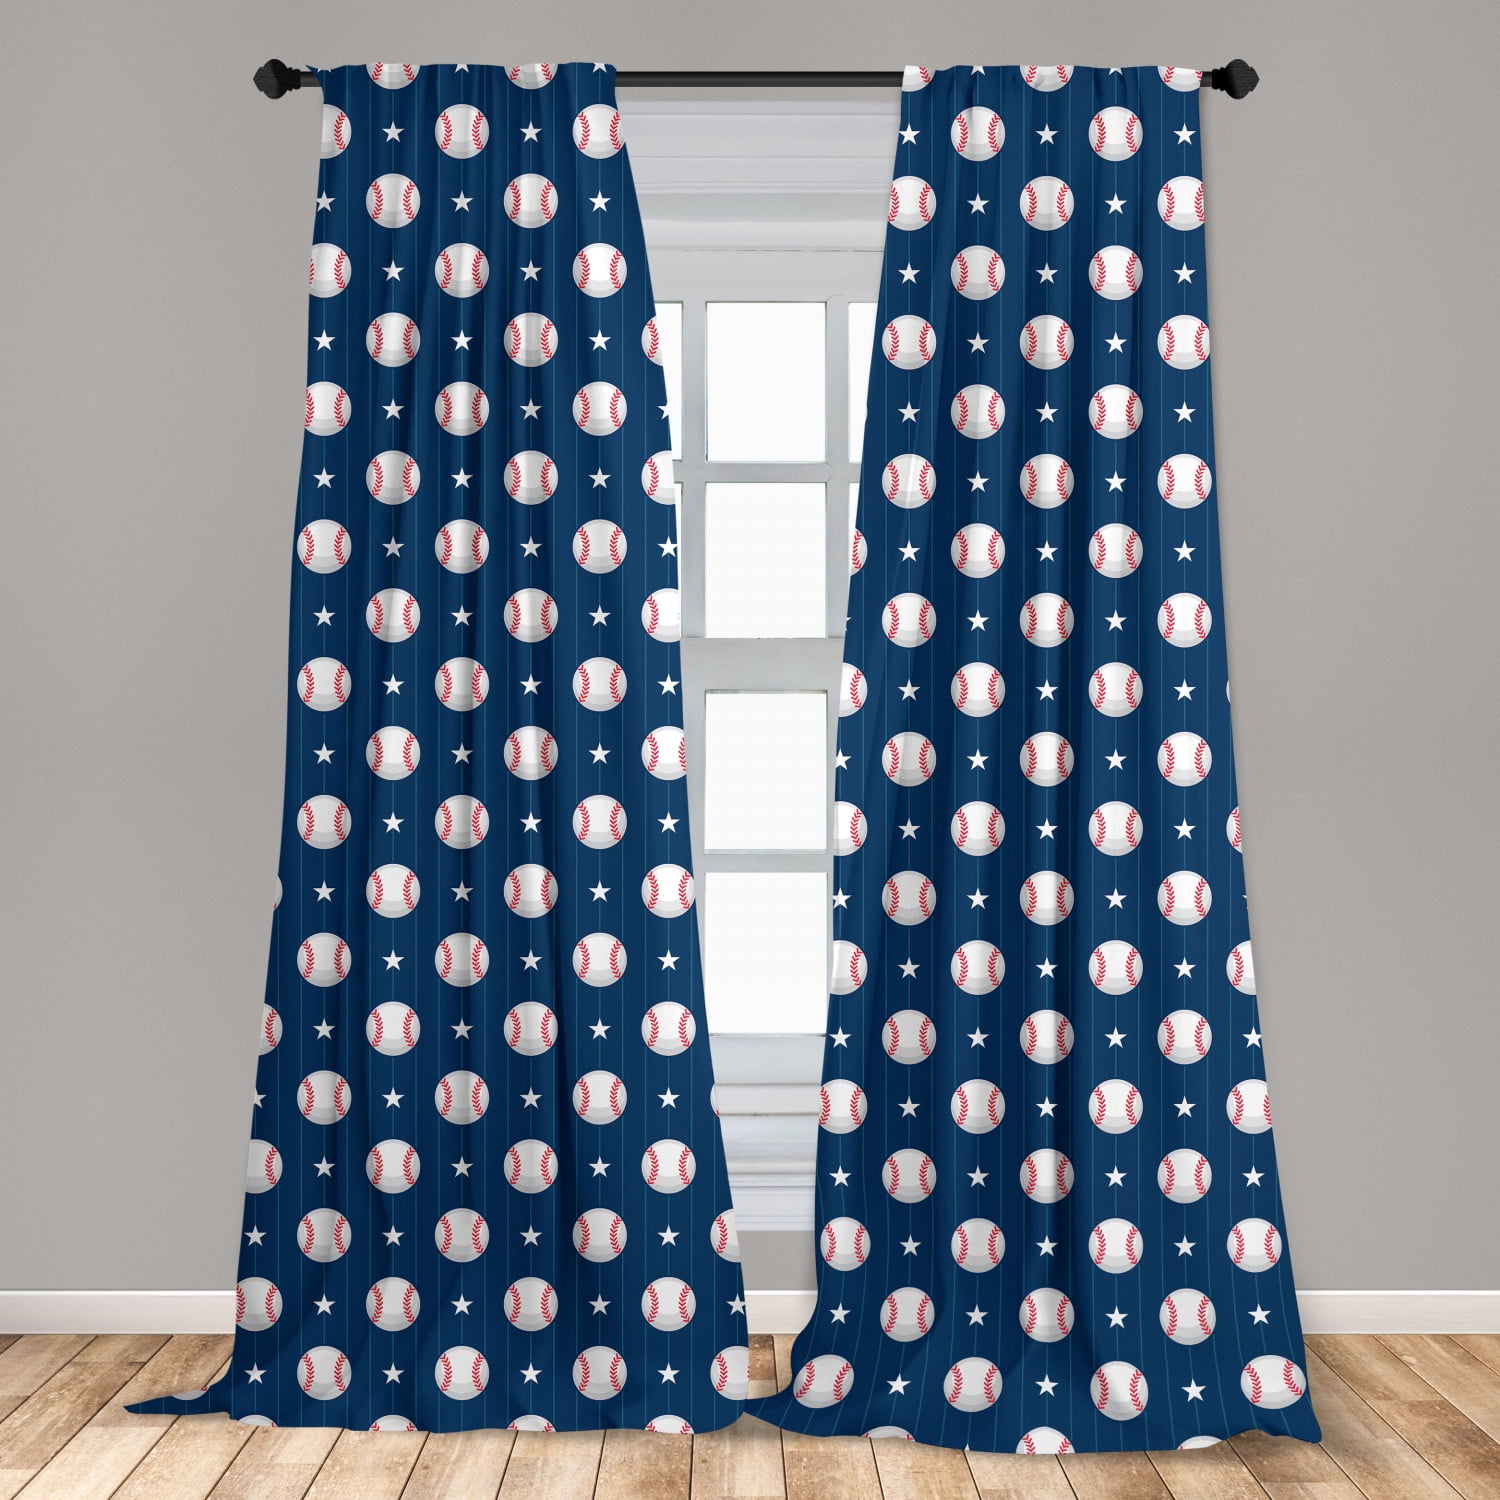 Sports Curtains 2 Panels Set, Baseball Patterns on Vertical Striped Background Stars Design, Window Drapes for Living Room Bedroom, 56"W X 84"L, Night Blue Red White, by Ambesonne